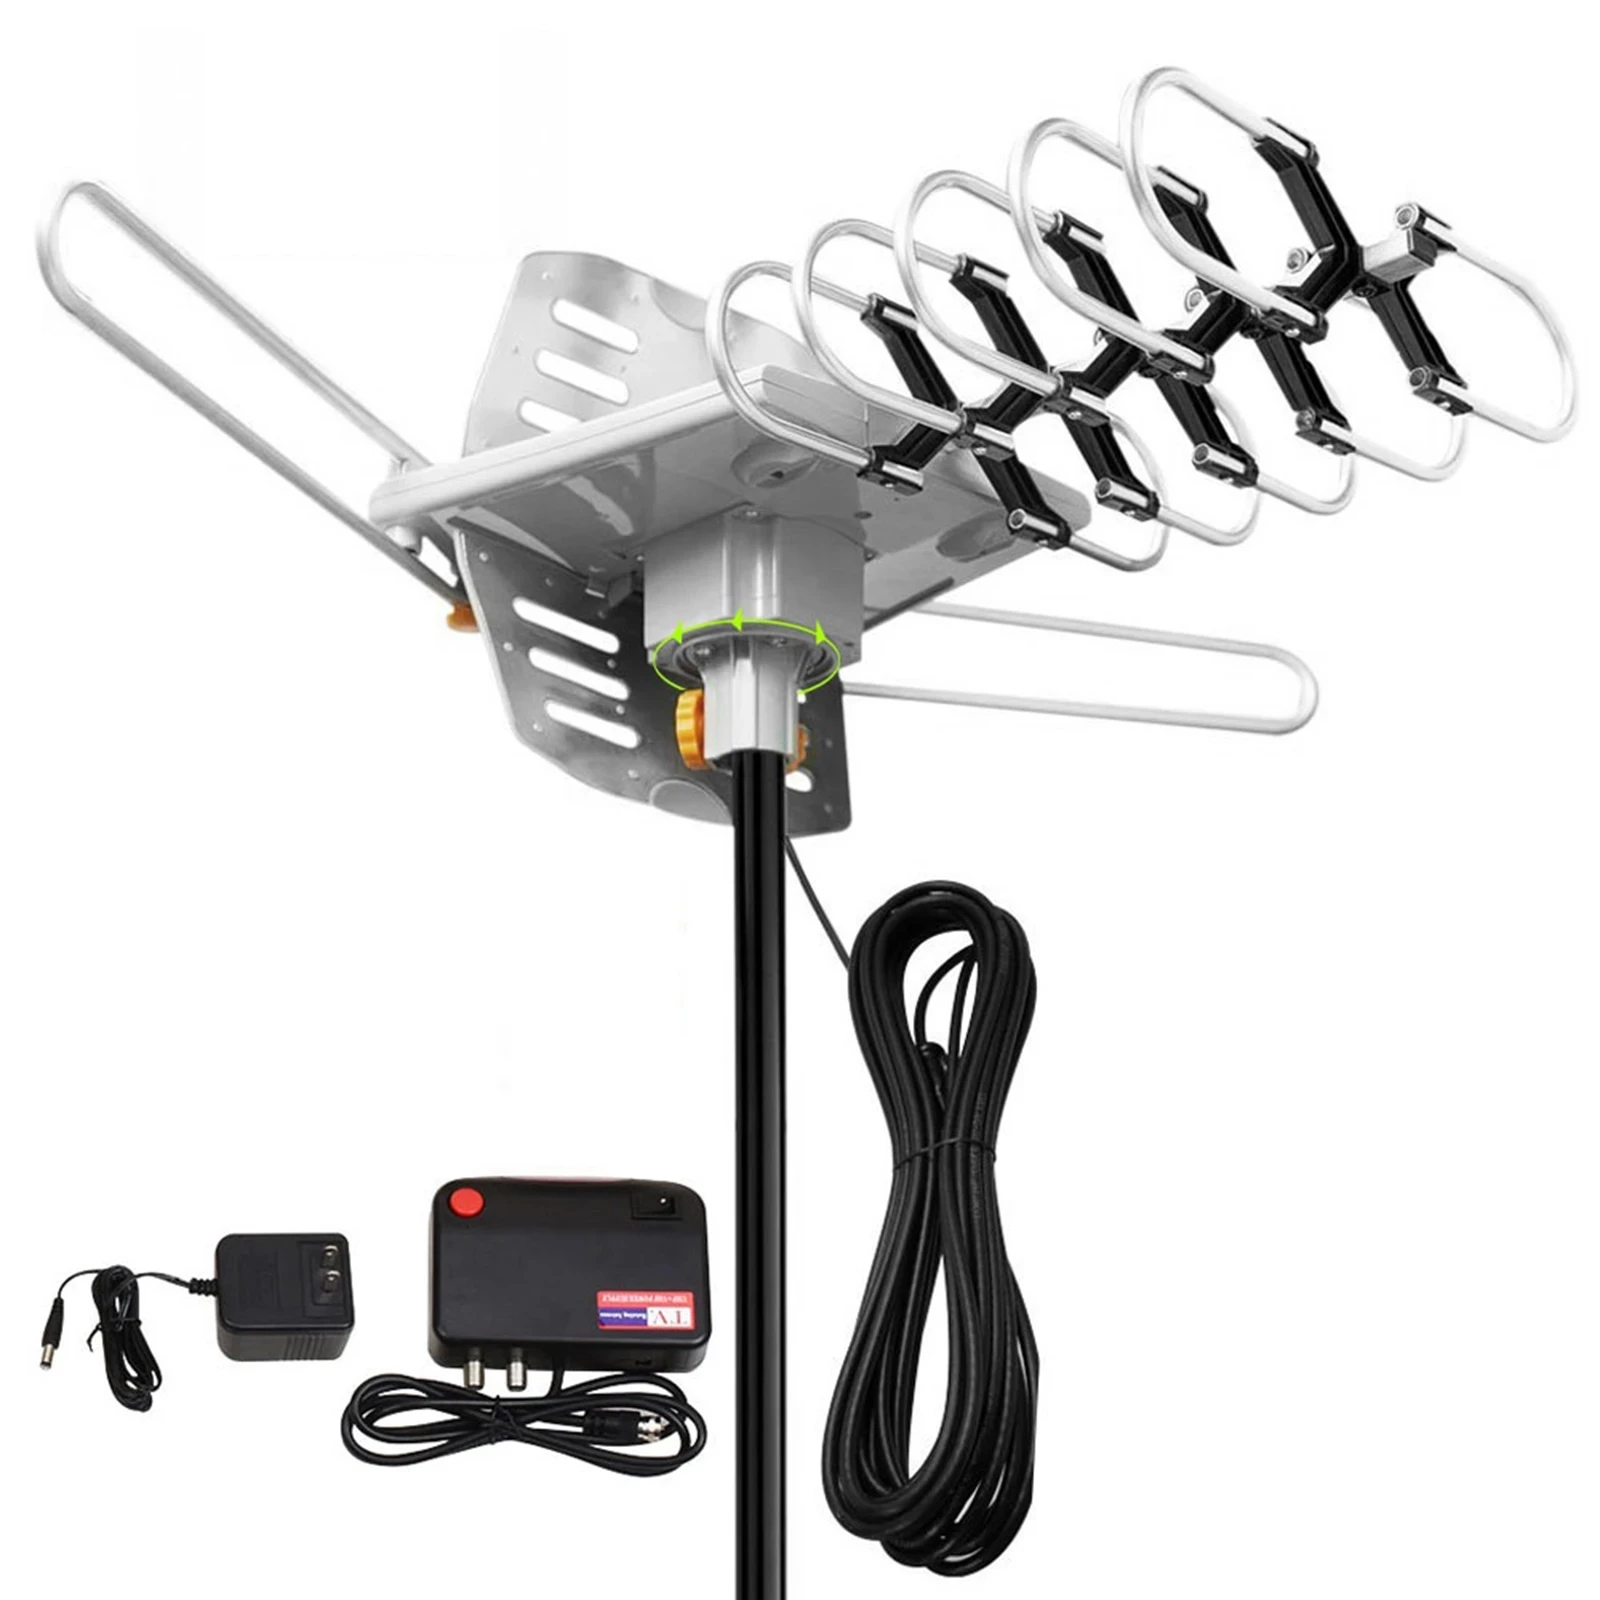 

TV Antenna Outdoor Digital Amplified HDTV Antenna 150 Miles Support 2 TVs-UHF VHF/1080P/4K with Remote Control 33ft Coax Cable